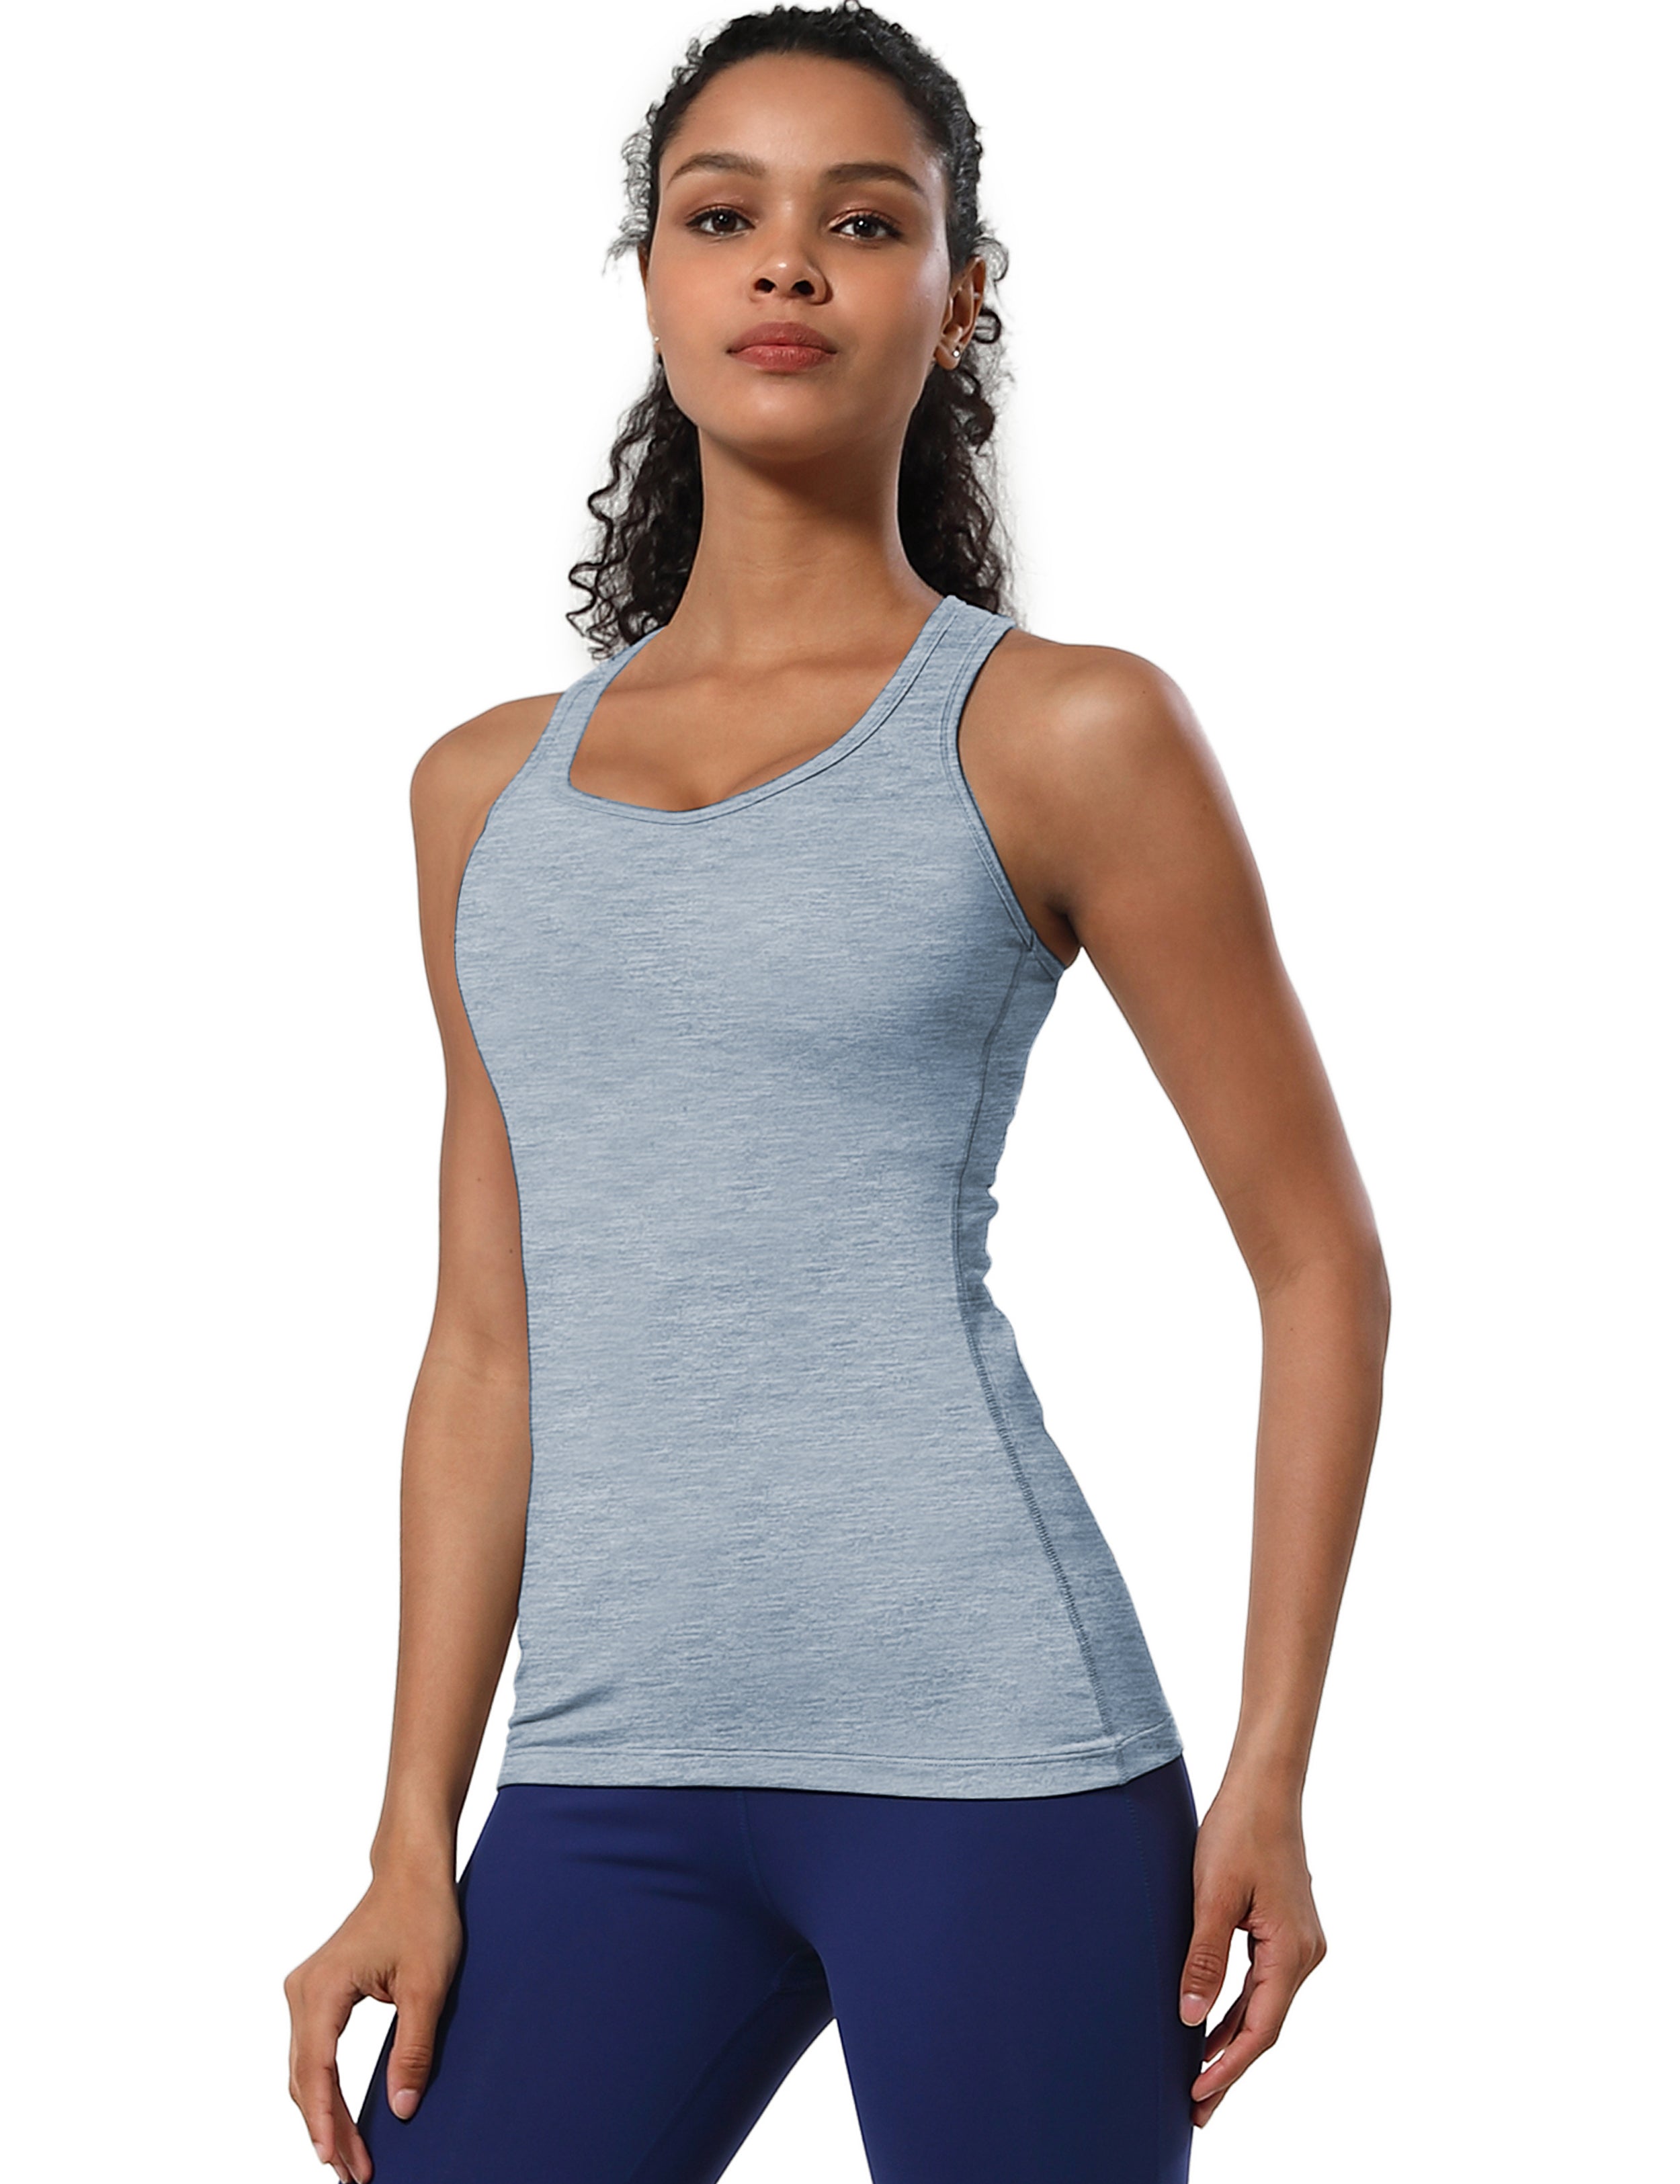 Racerback Athletic Tank Tops heatherblue 92%Nylon/8%Spandex(Cotton Soft) Designed for Tall Size Tight Fit So buttery soft, it feels weightless Sweat-wicking Four-way stretch Breathable Contours your body Sits below the waistband for moderate, everyday coverage